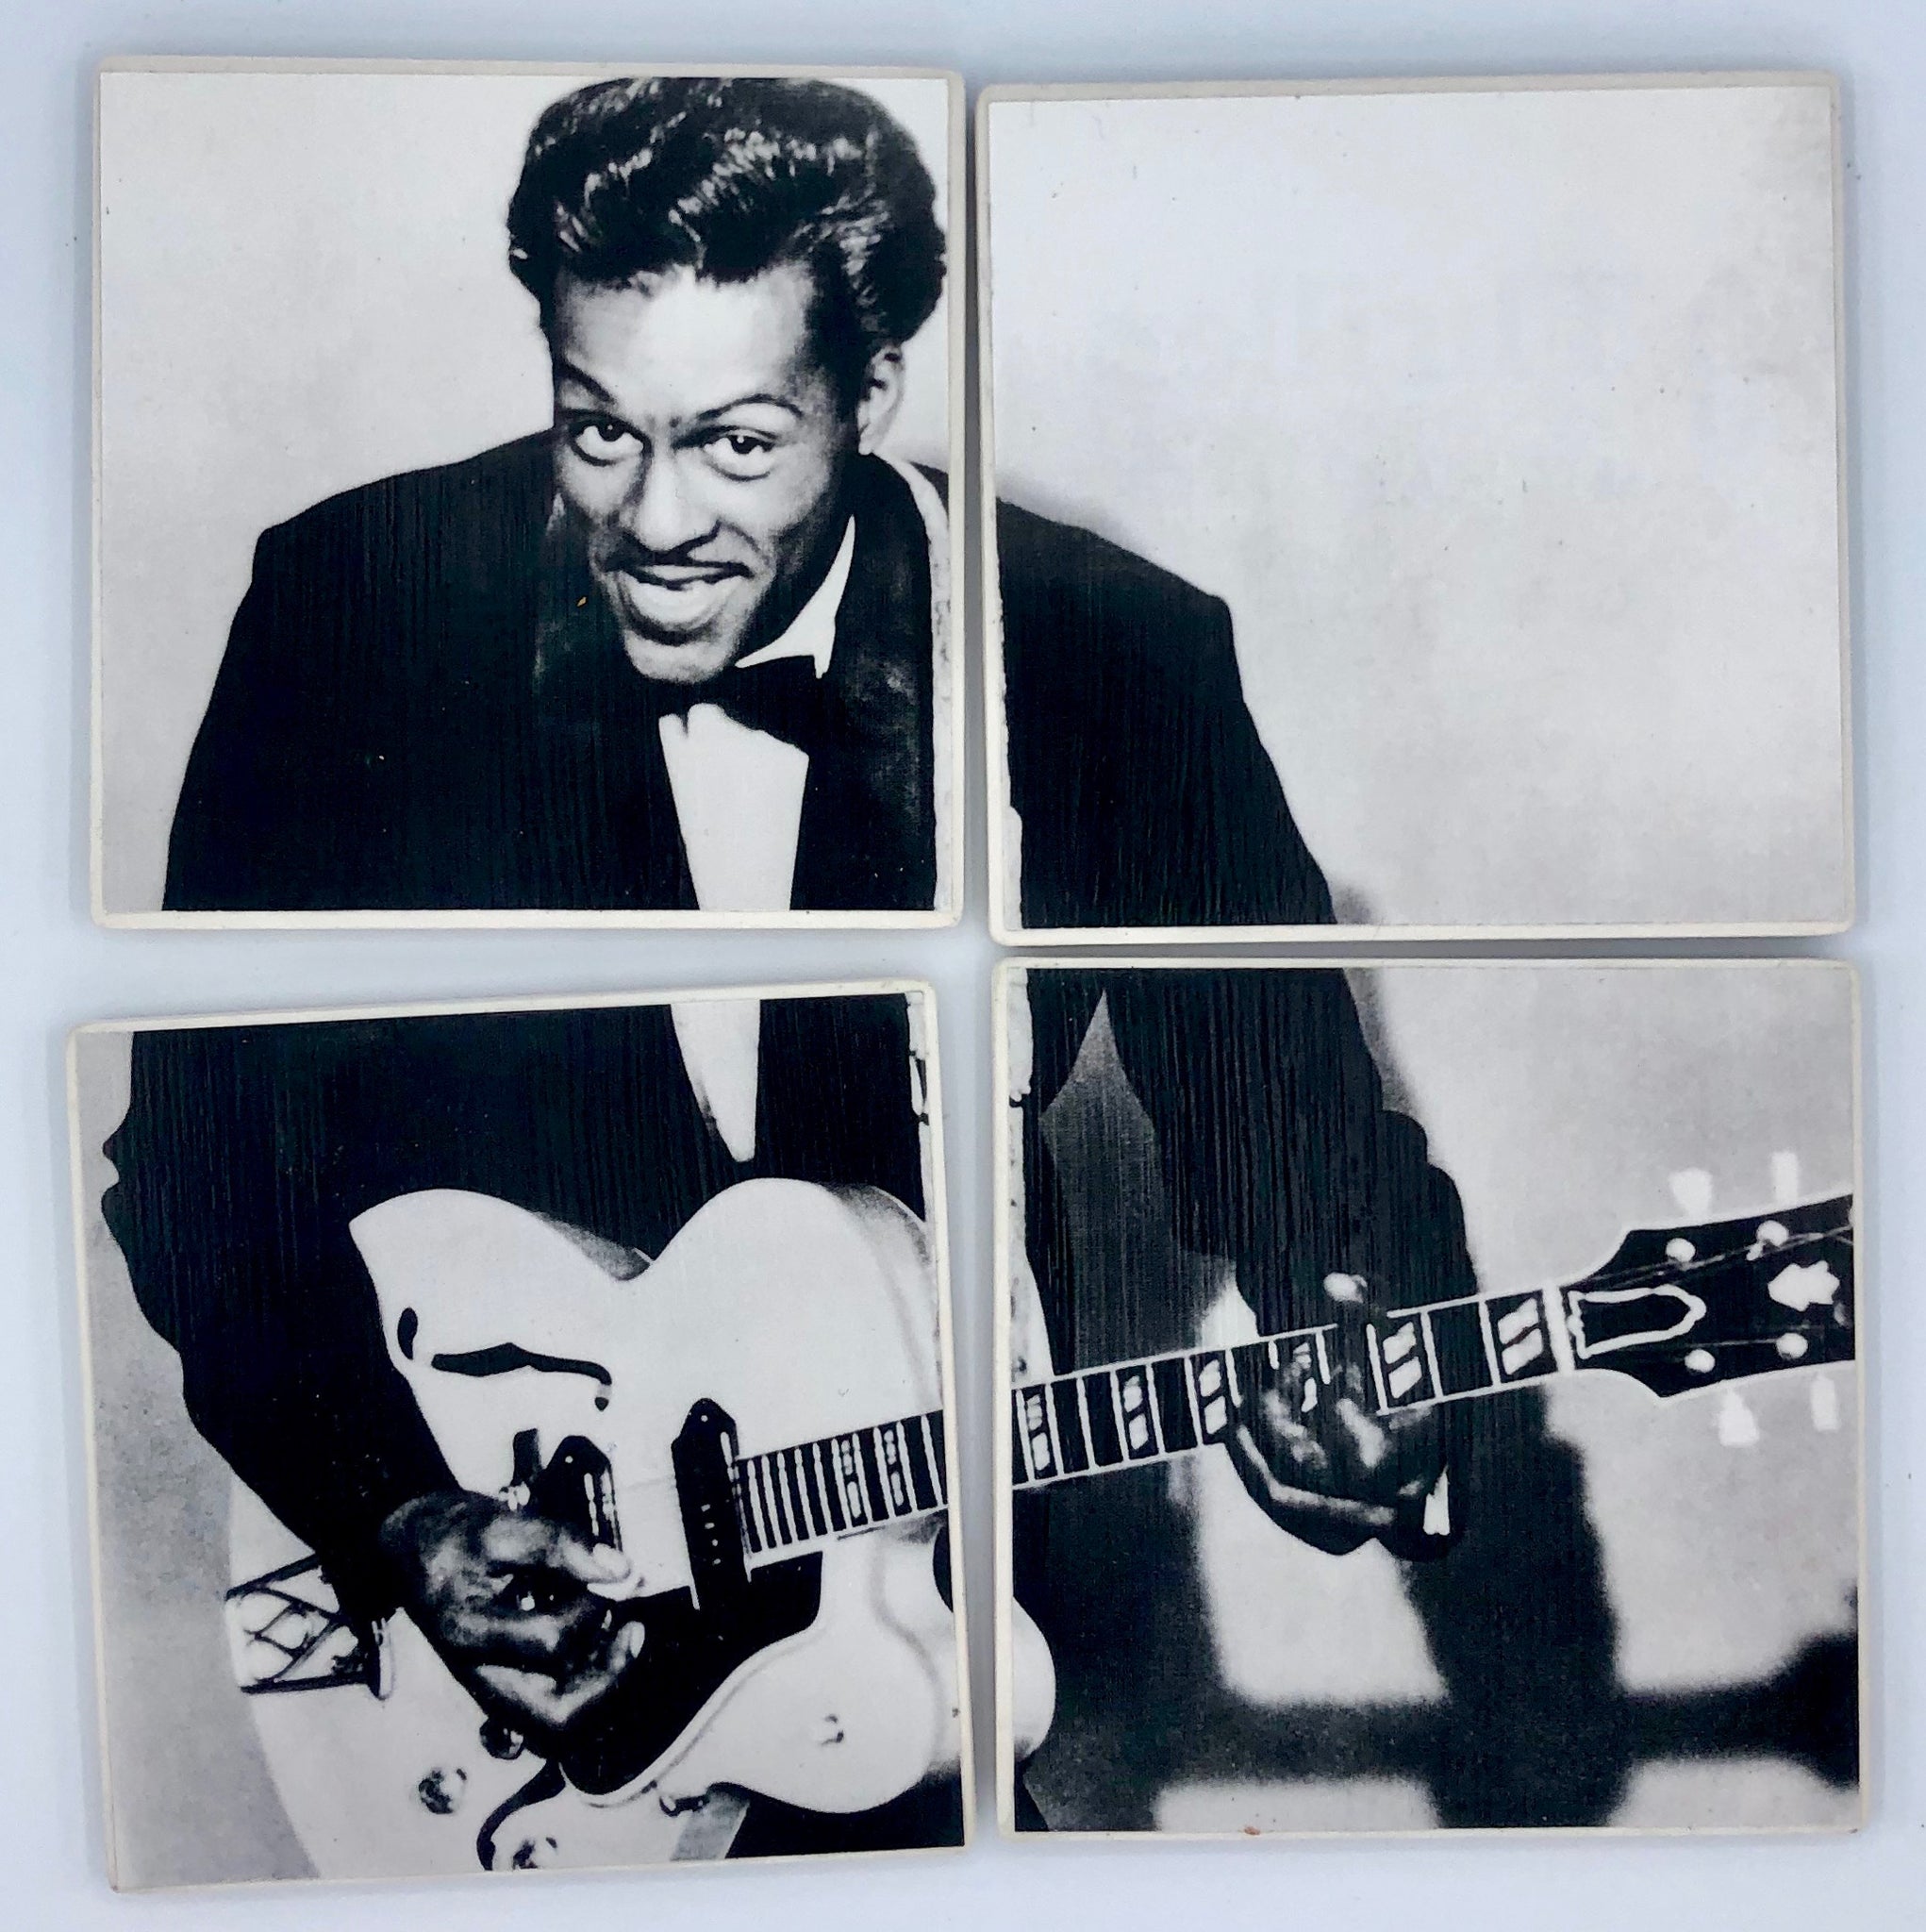 CHUCK BERRY - father of rock 'n roll